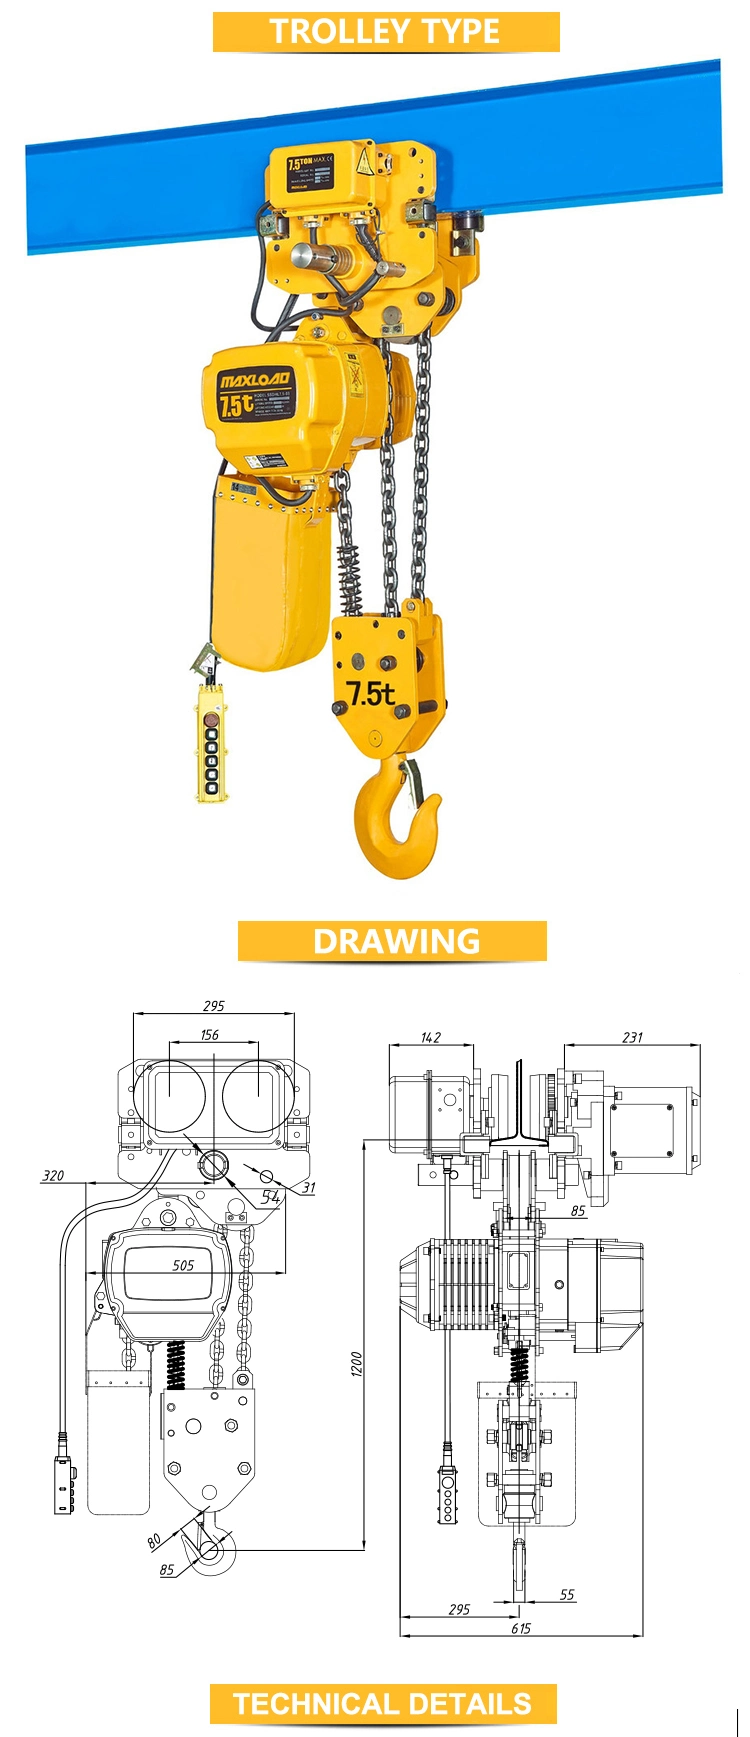 Manufacturer of 7.5t Electric Chain Hoist with Motorized Trolley